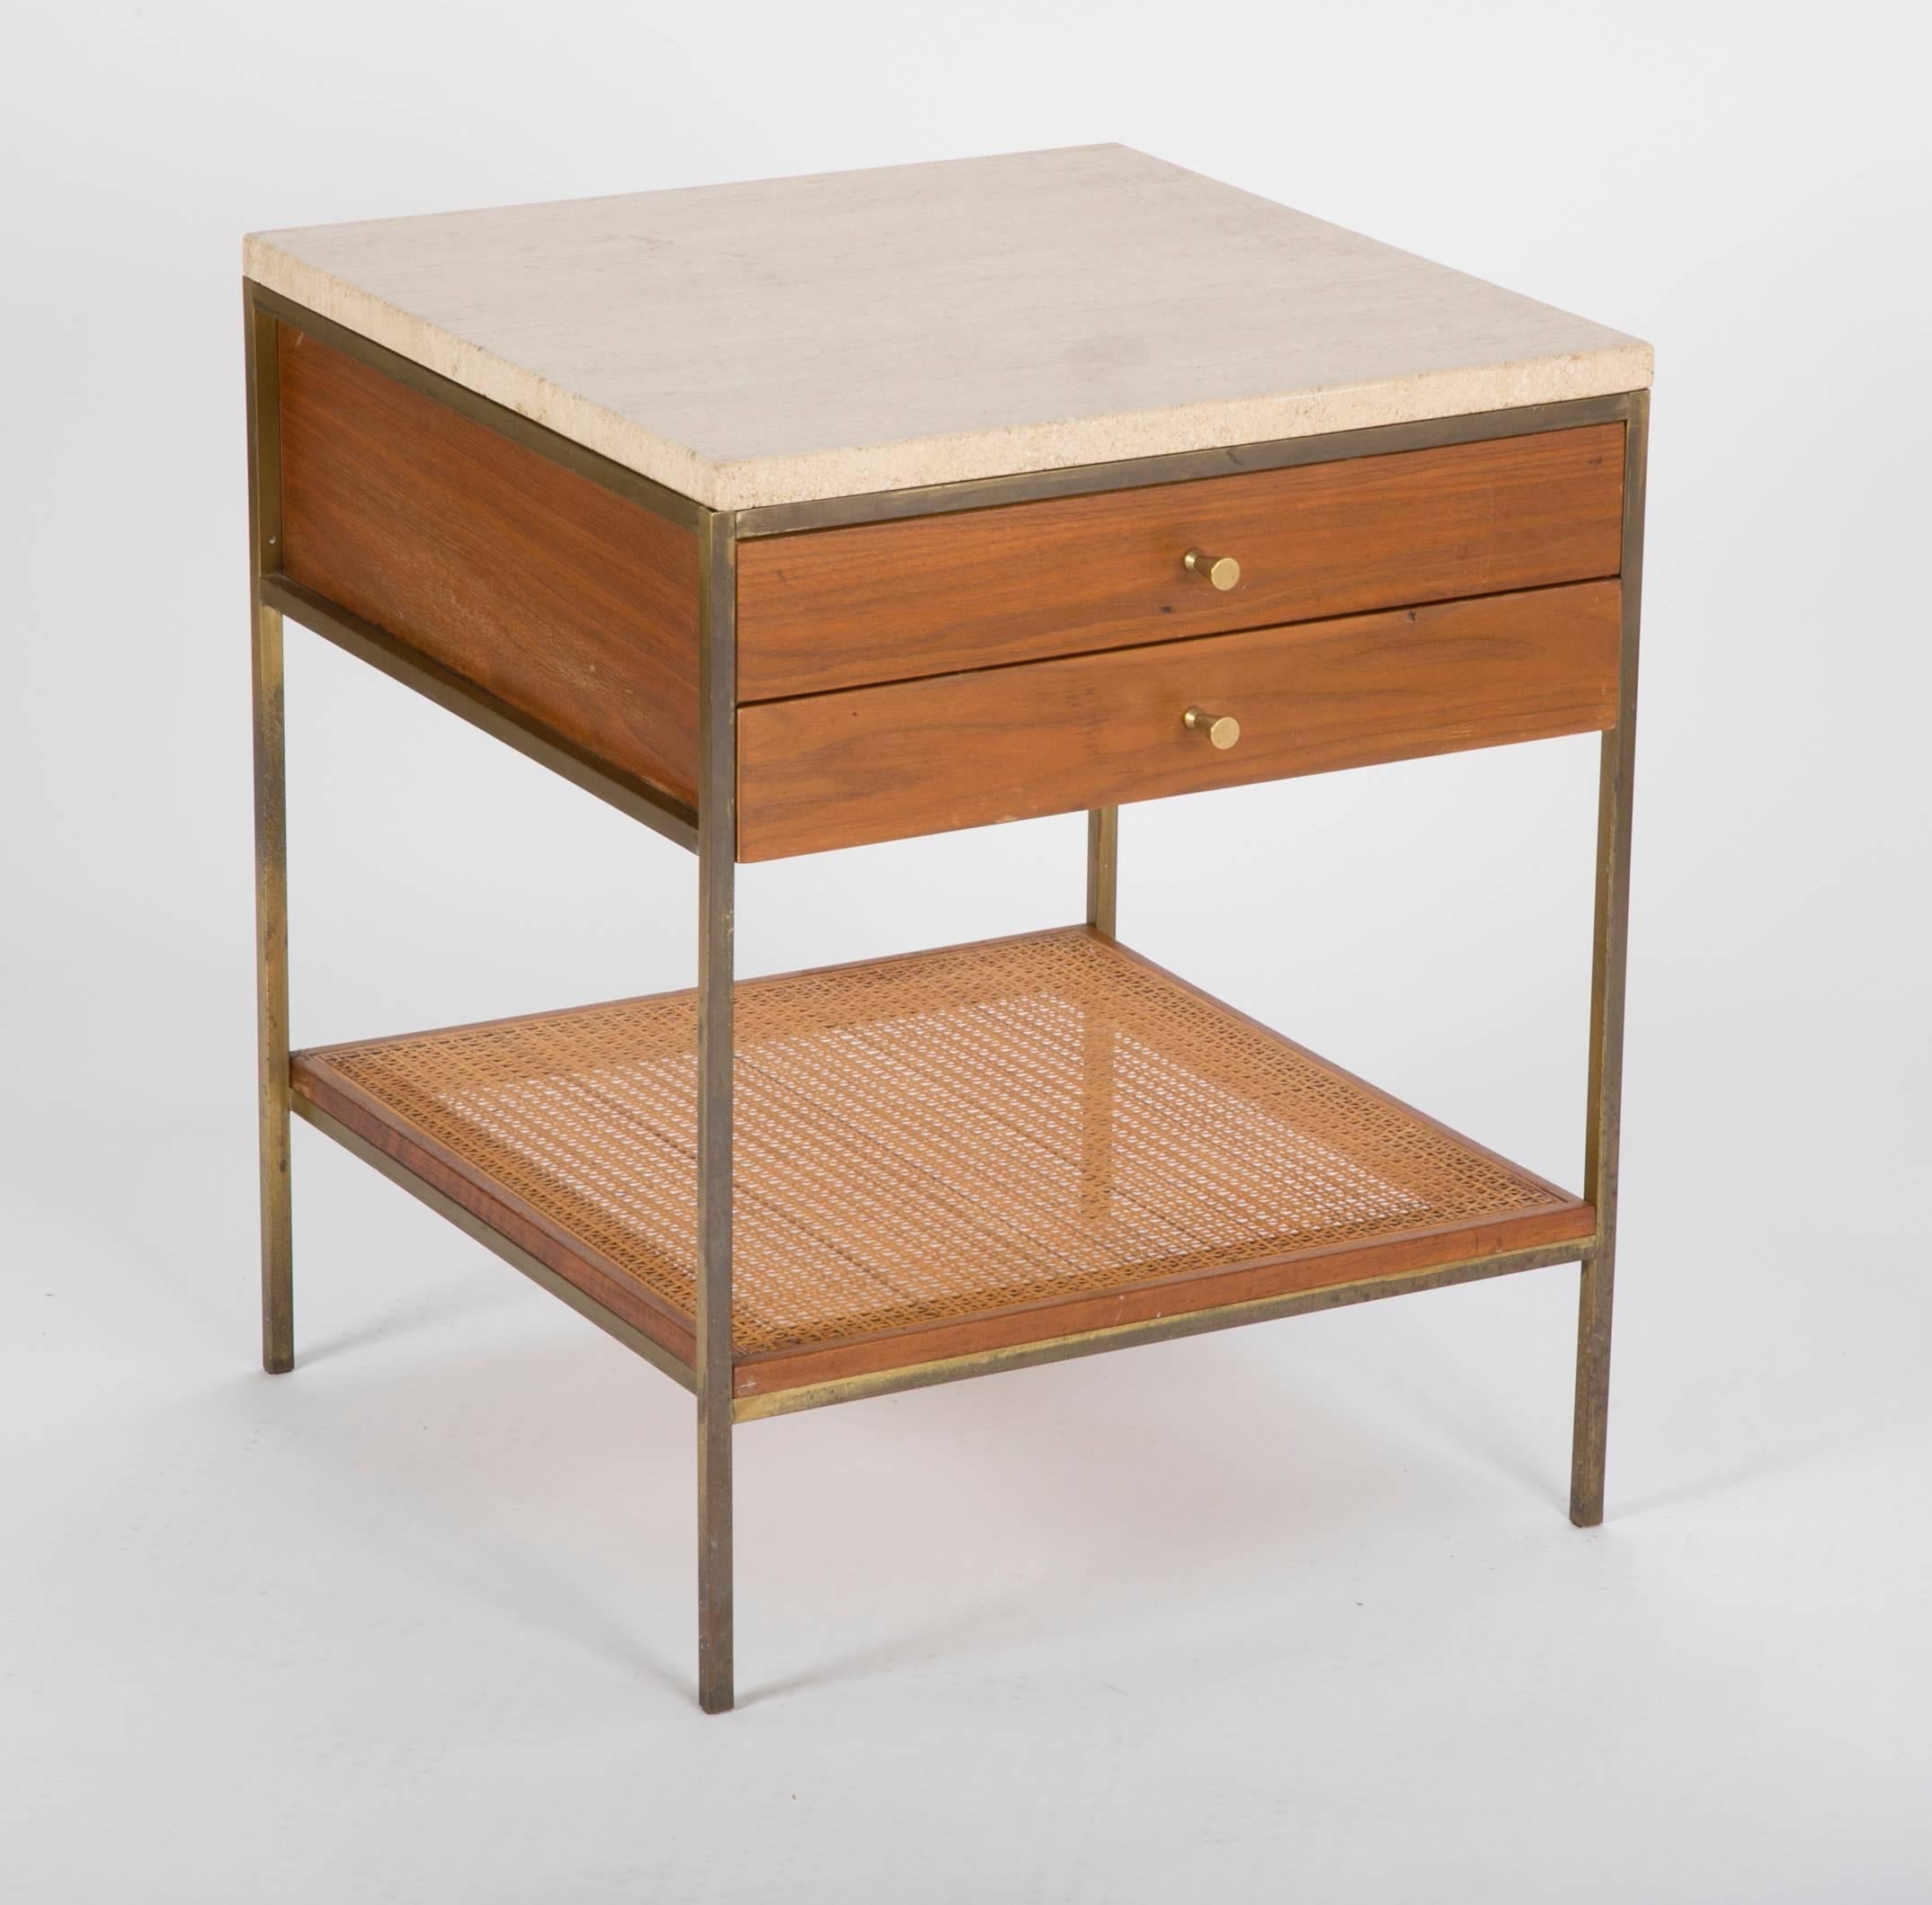 A pair of model 8714 nightstands with marble tops and caned shelfs. Designed by Paul McCobb.